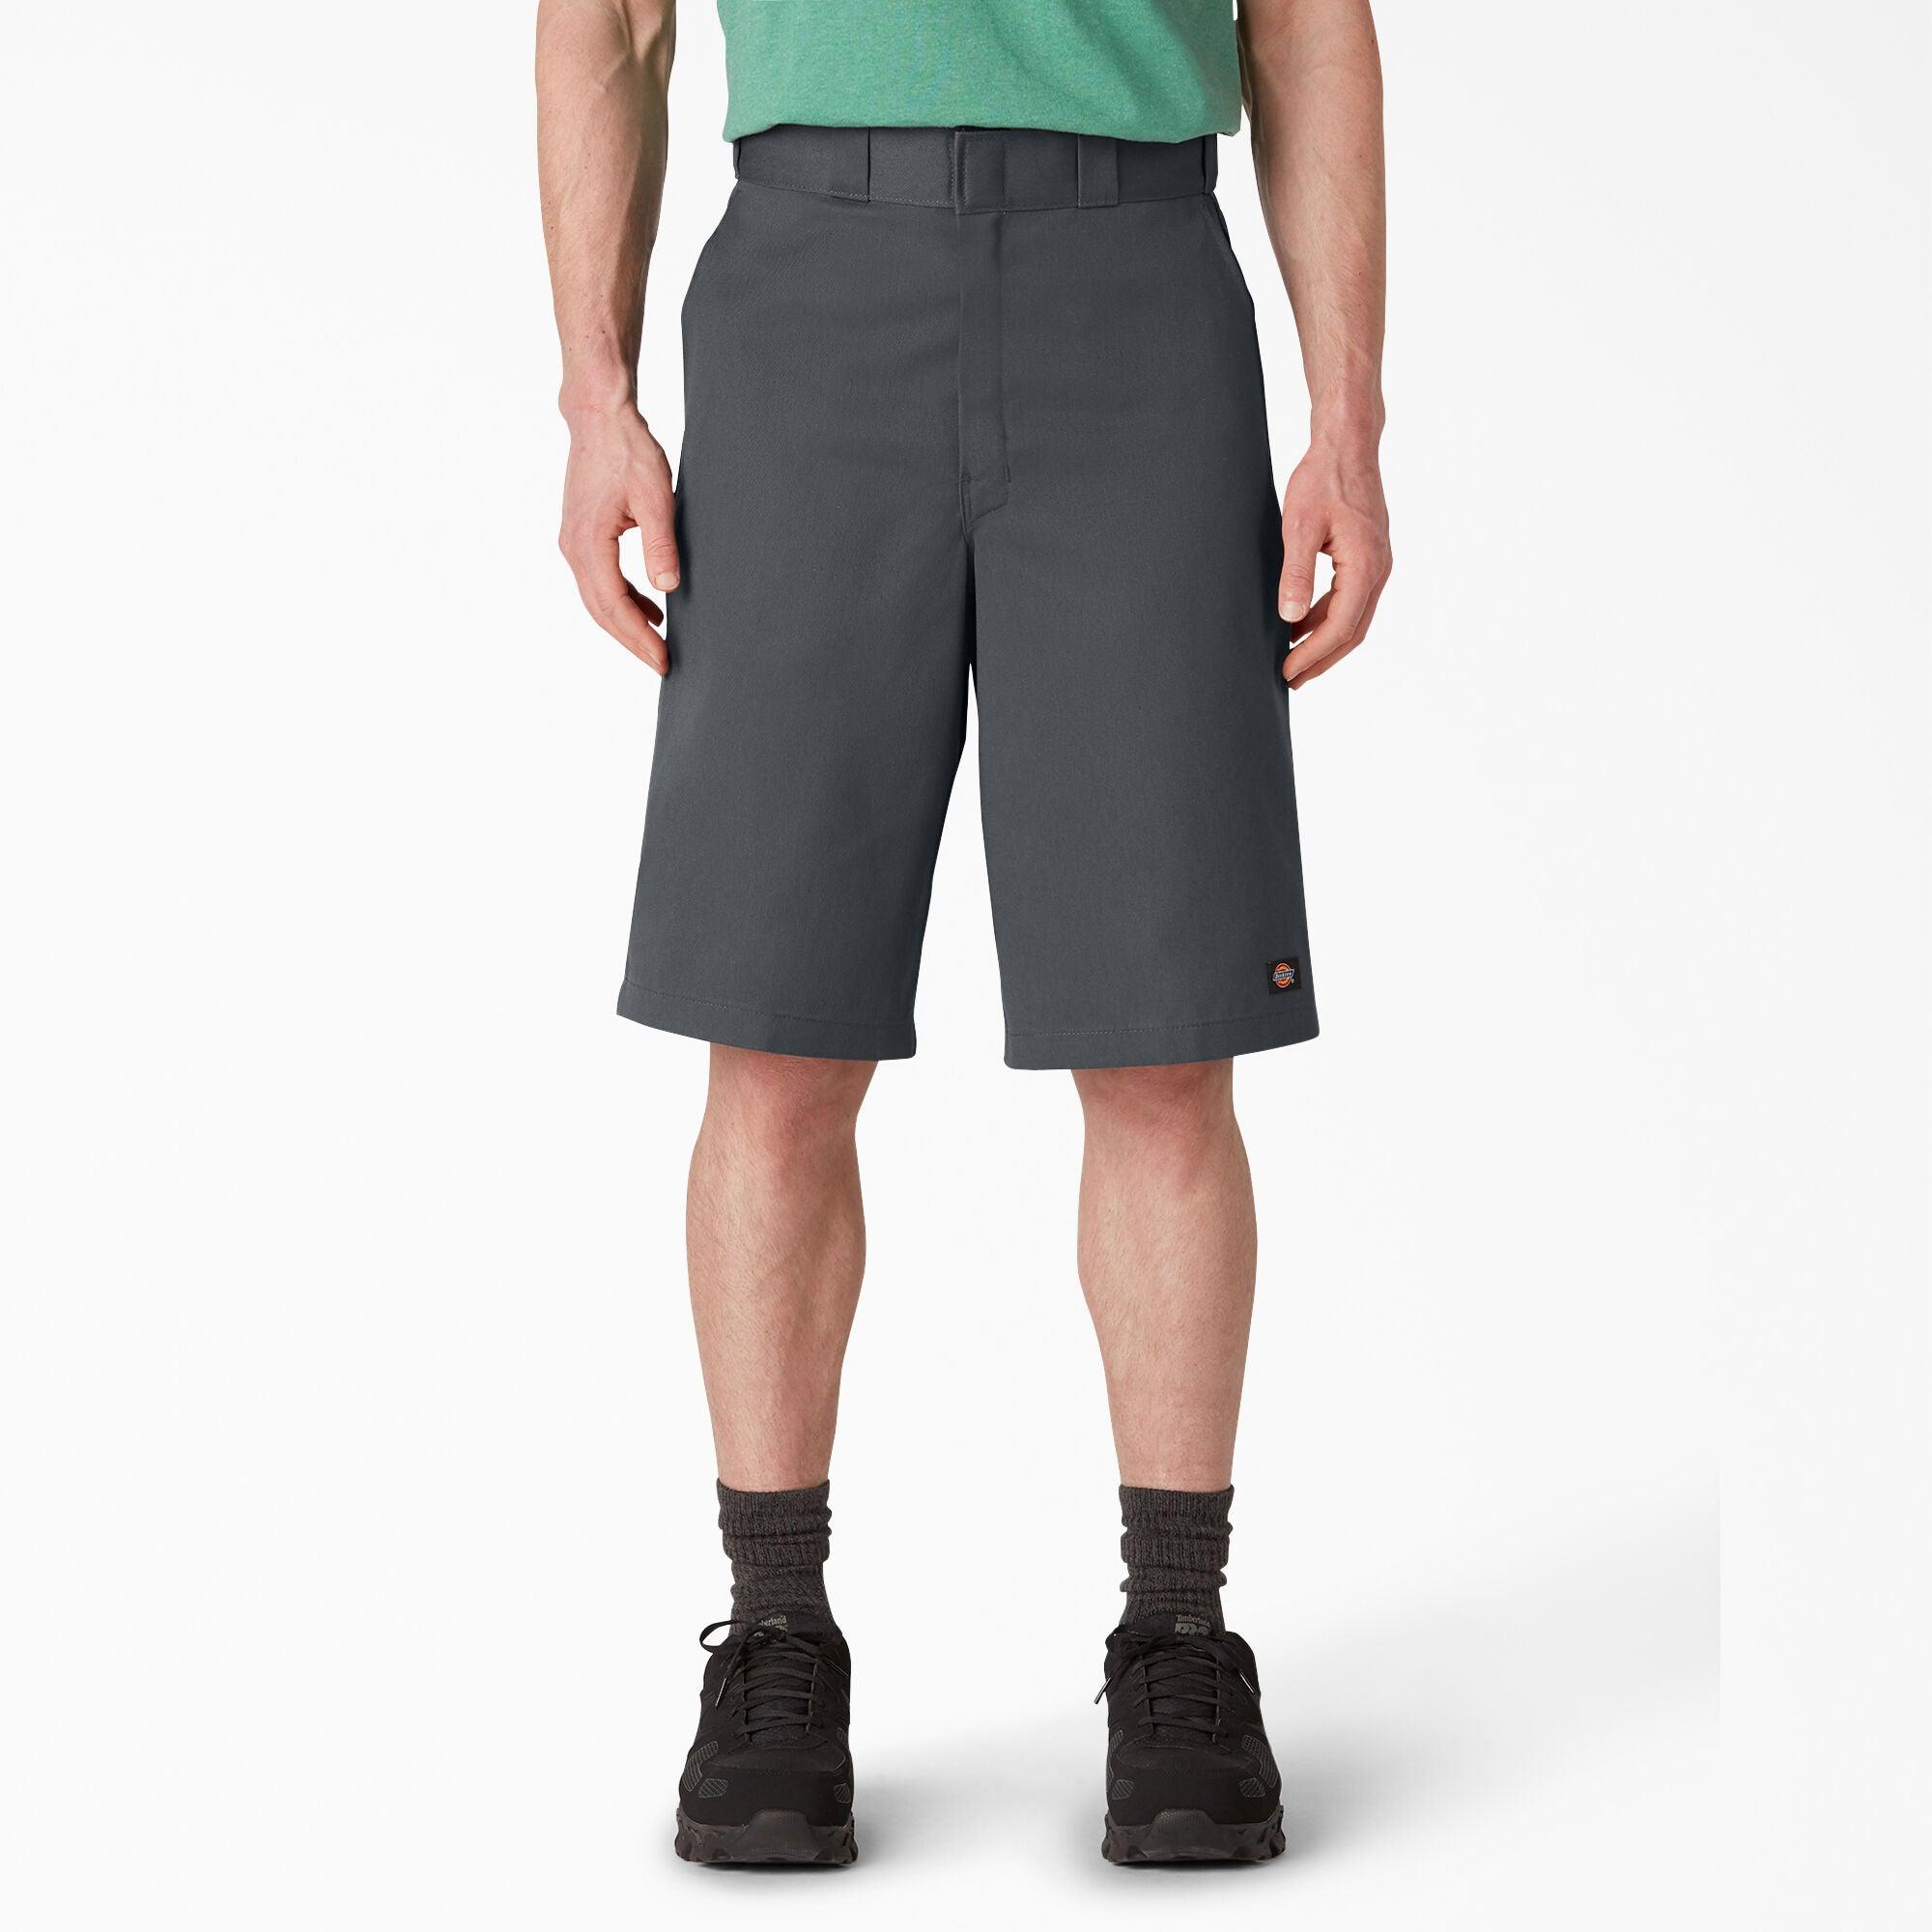 13" Loose Fit Multi-Use Pocket Work Shorts - Charcoal